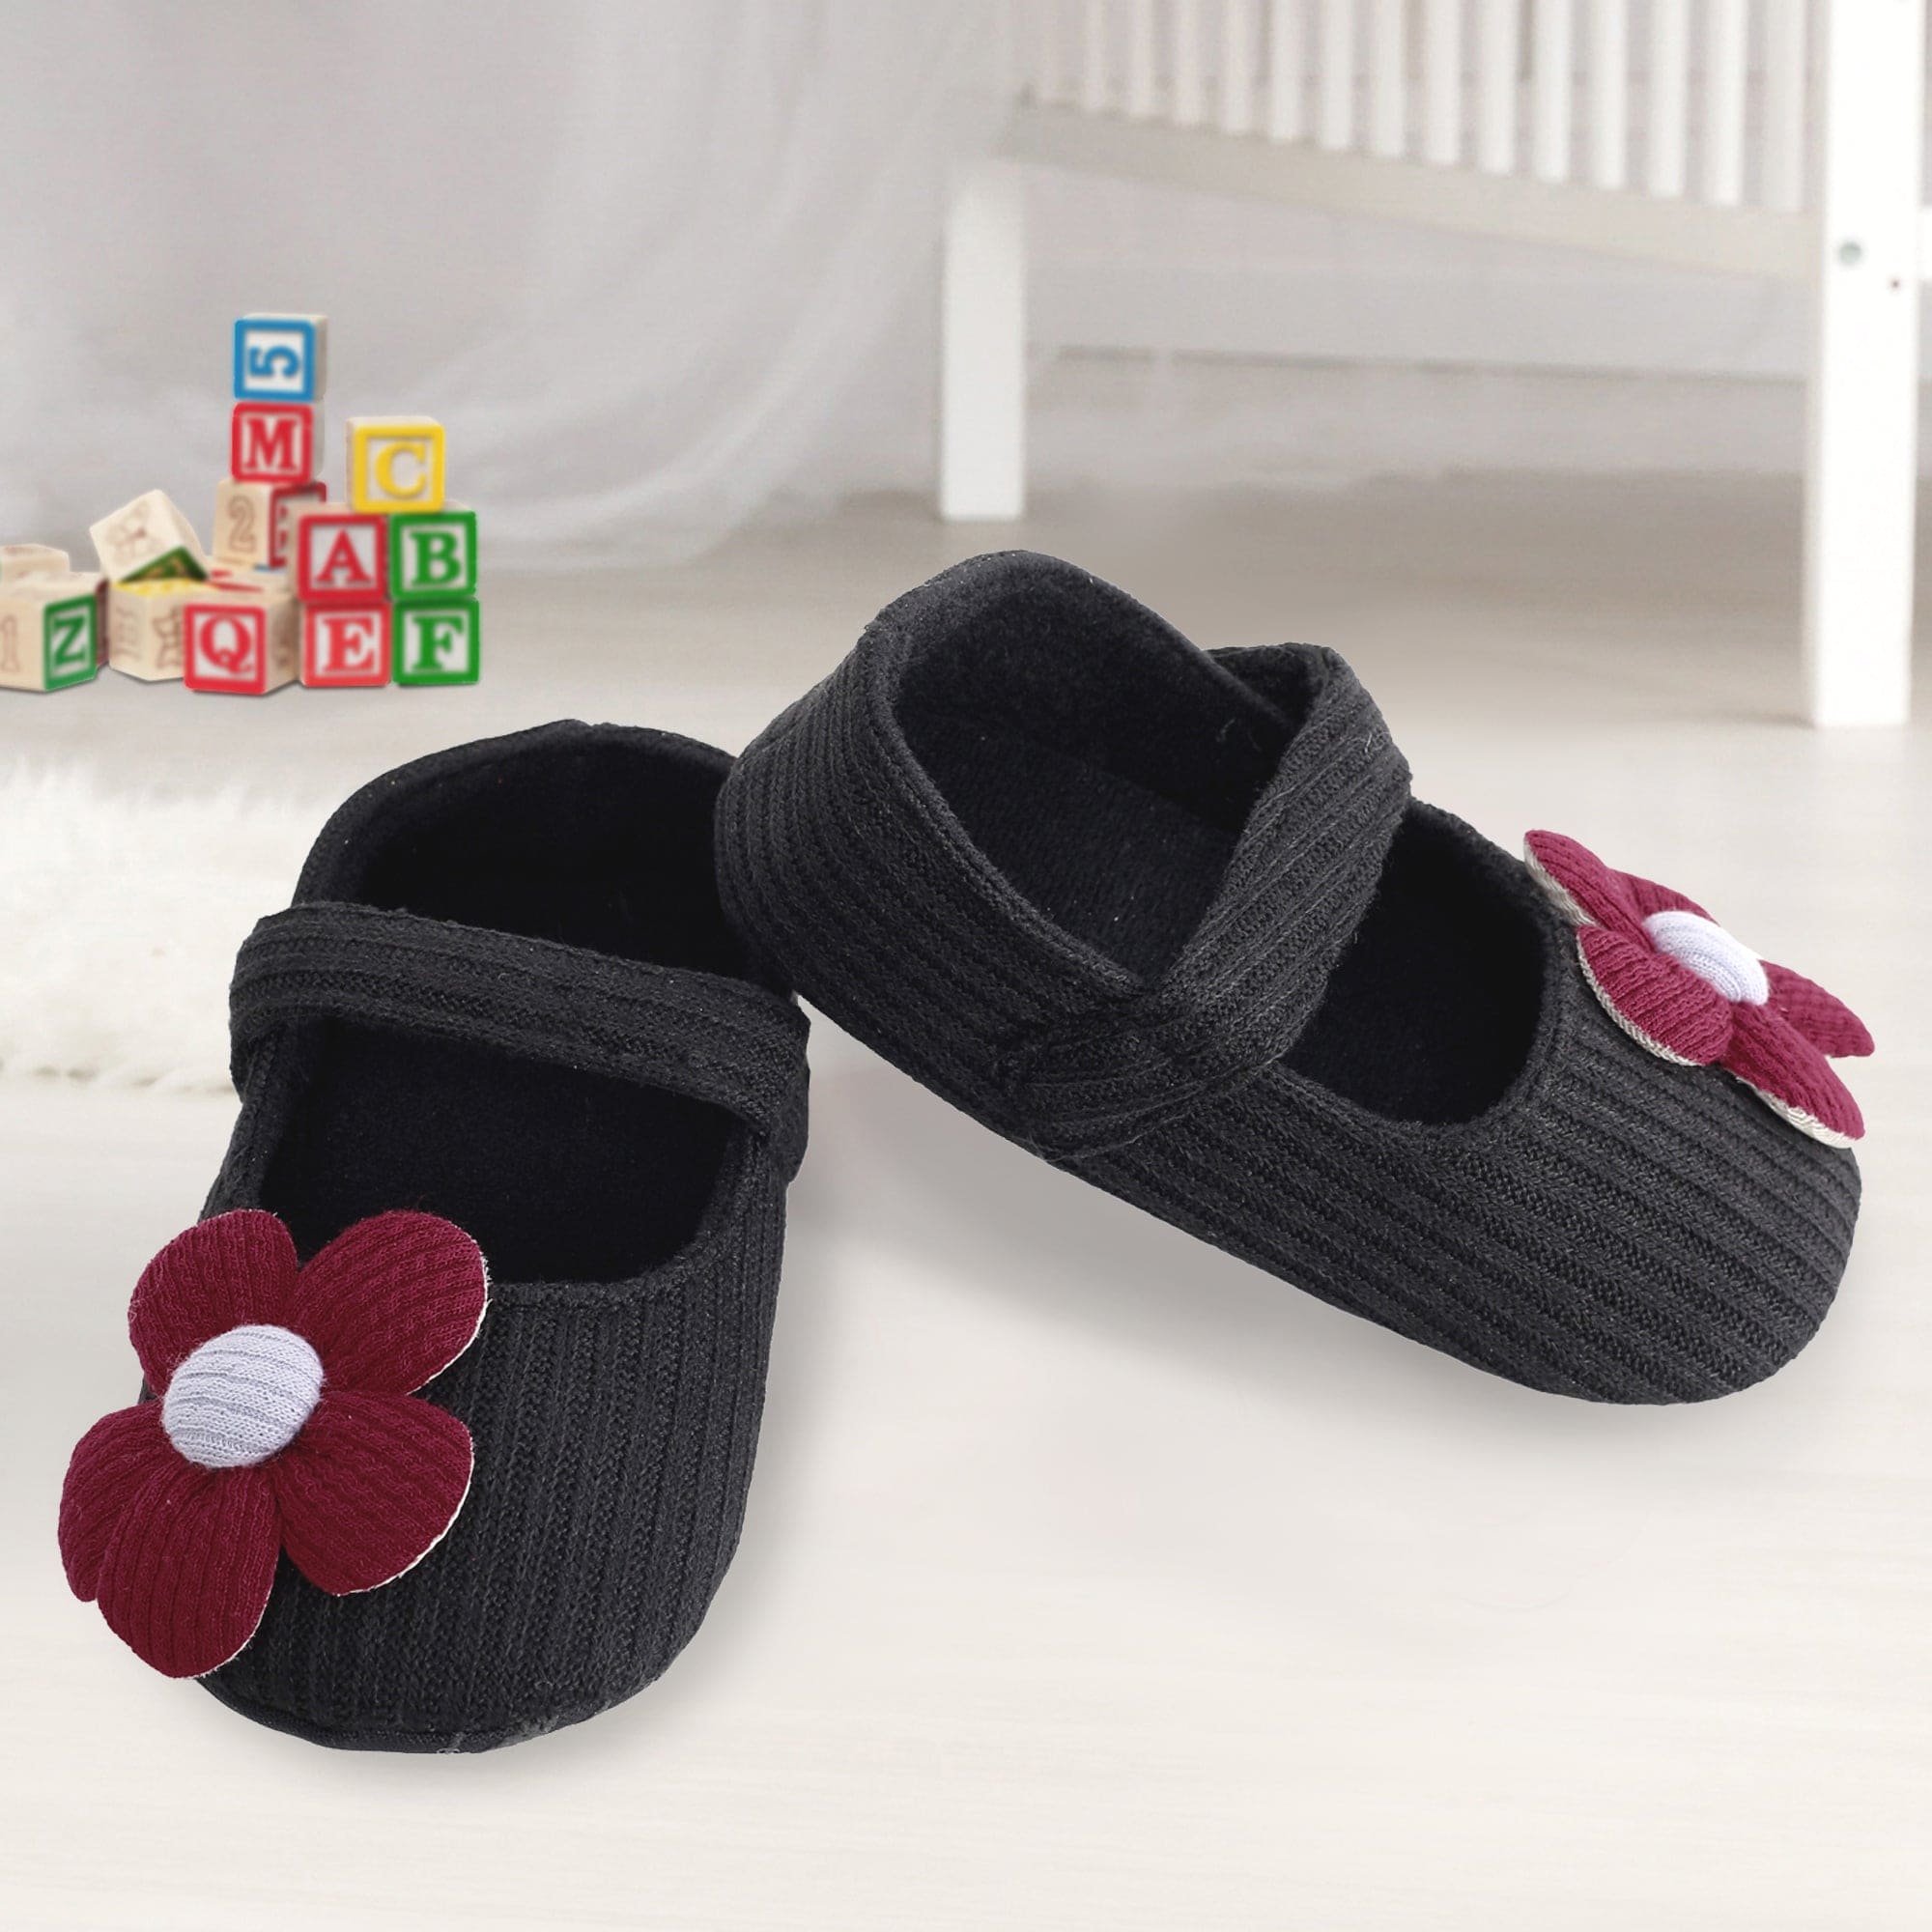 Buy Stylish Girls Sandals Online at the Best Price | Girls sandals, Baby  girl sandals, Stylish sandals